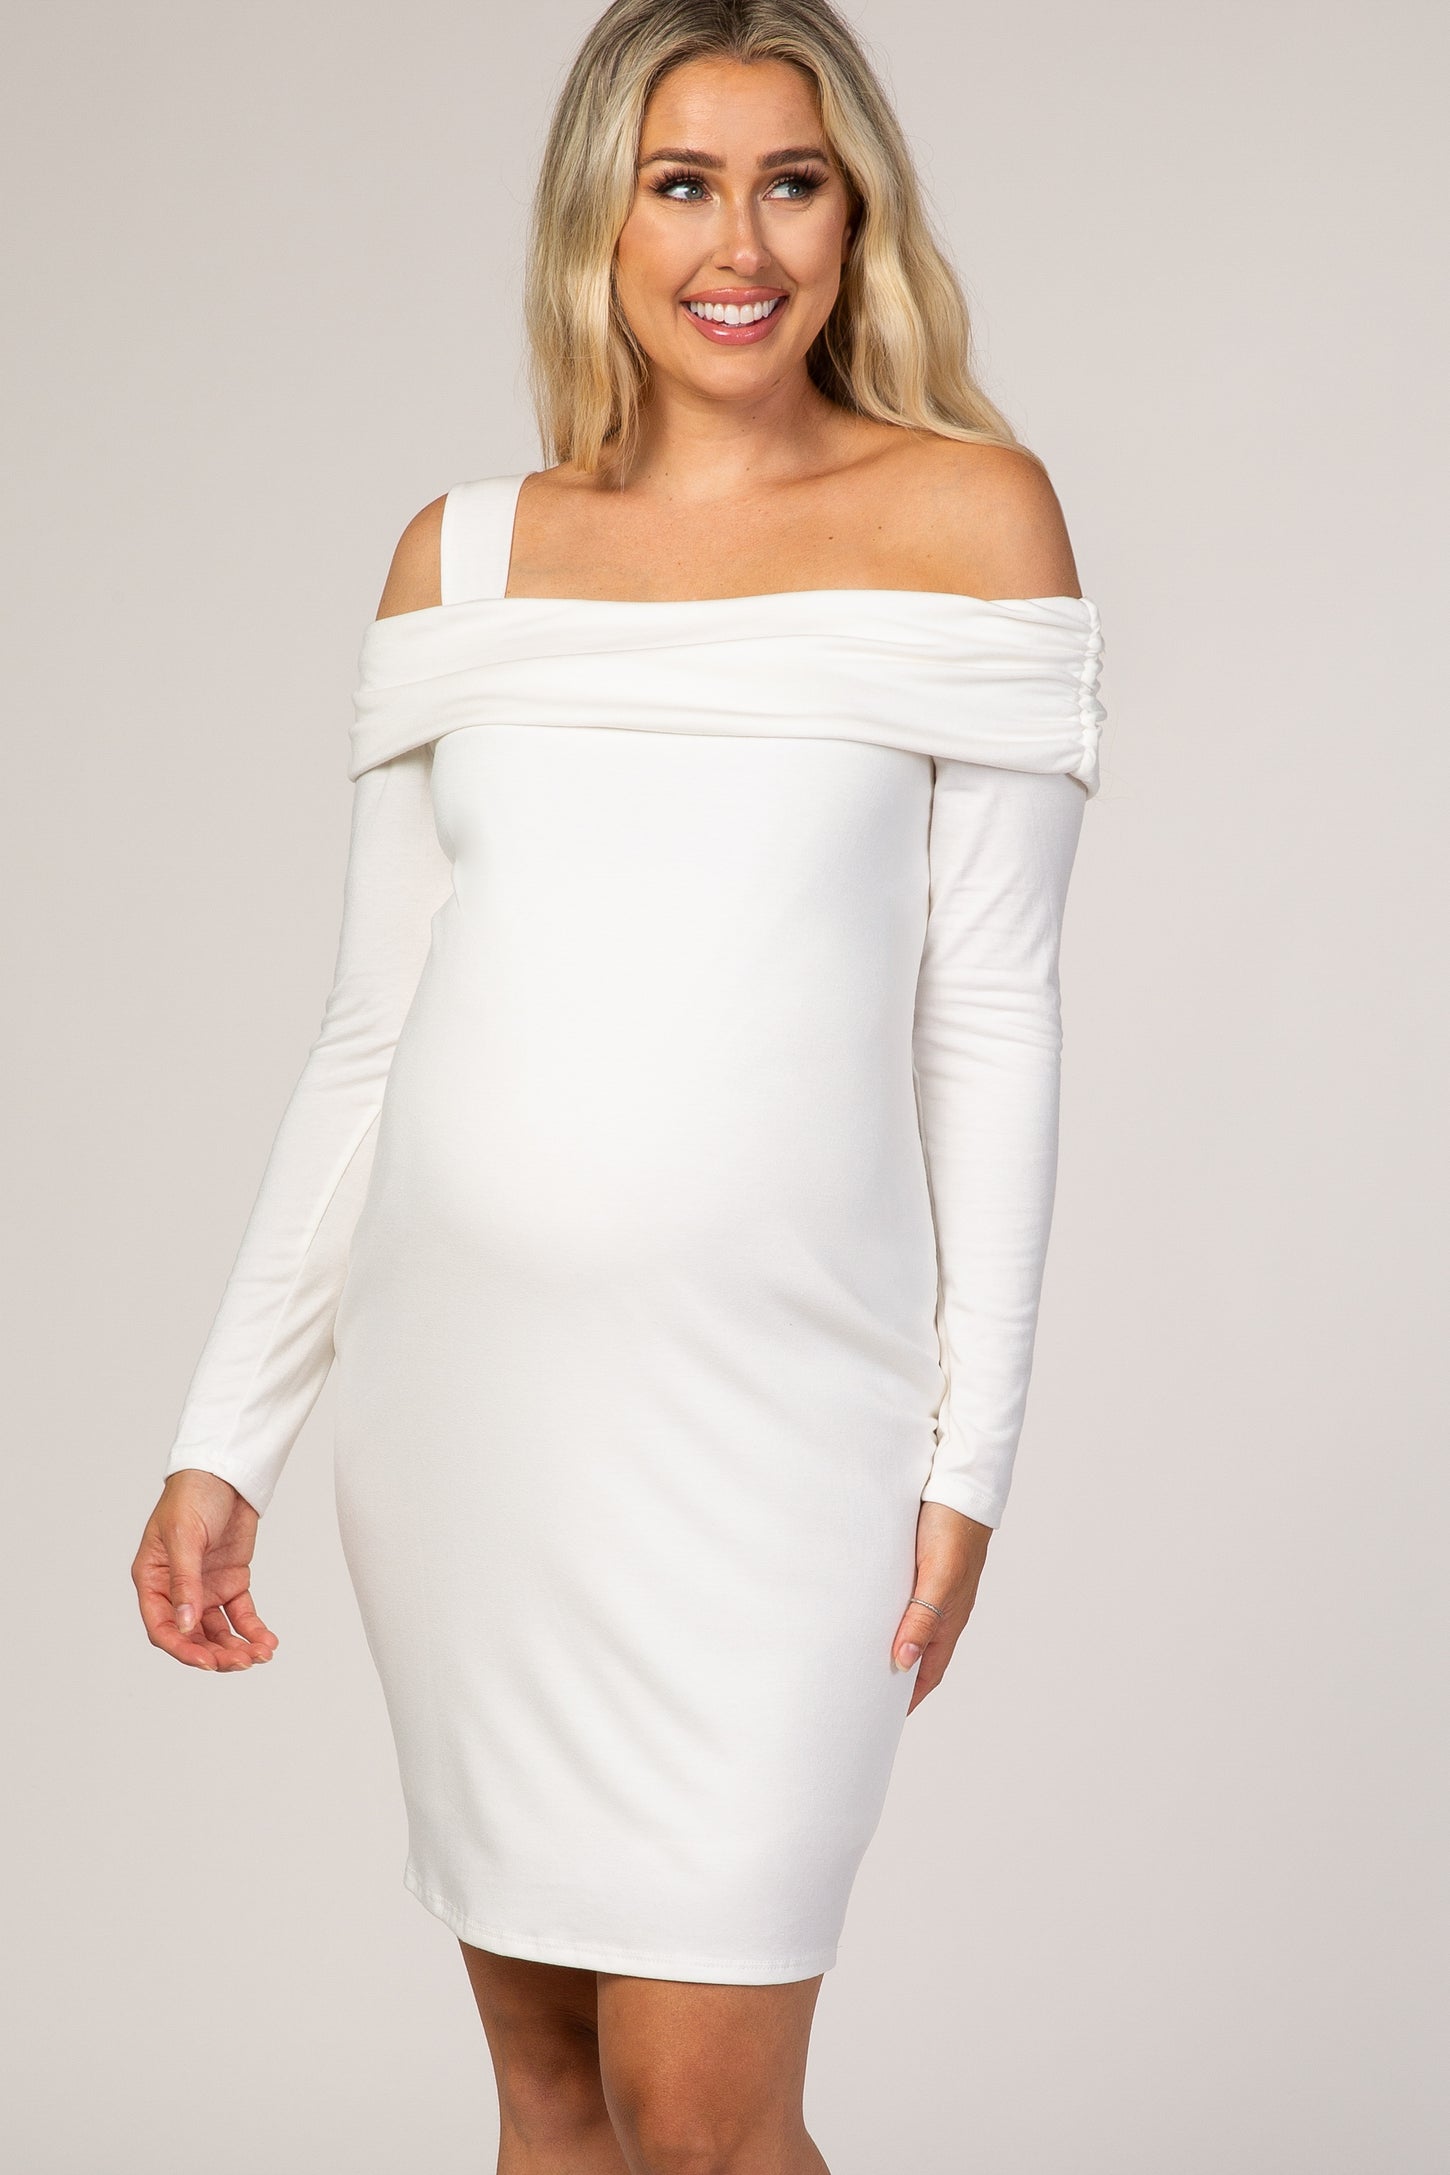 PinkBlush Ivory Fitted One Shoulder Maternity Dress